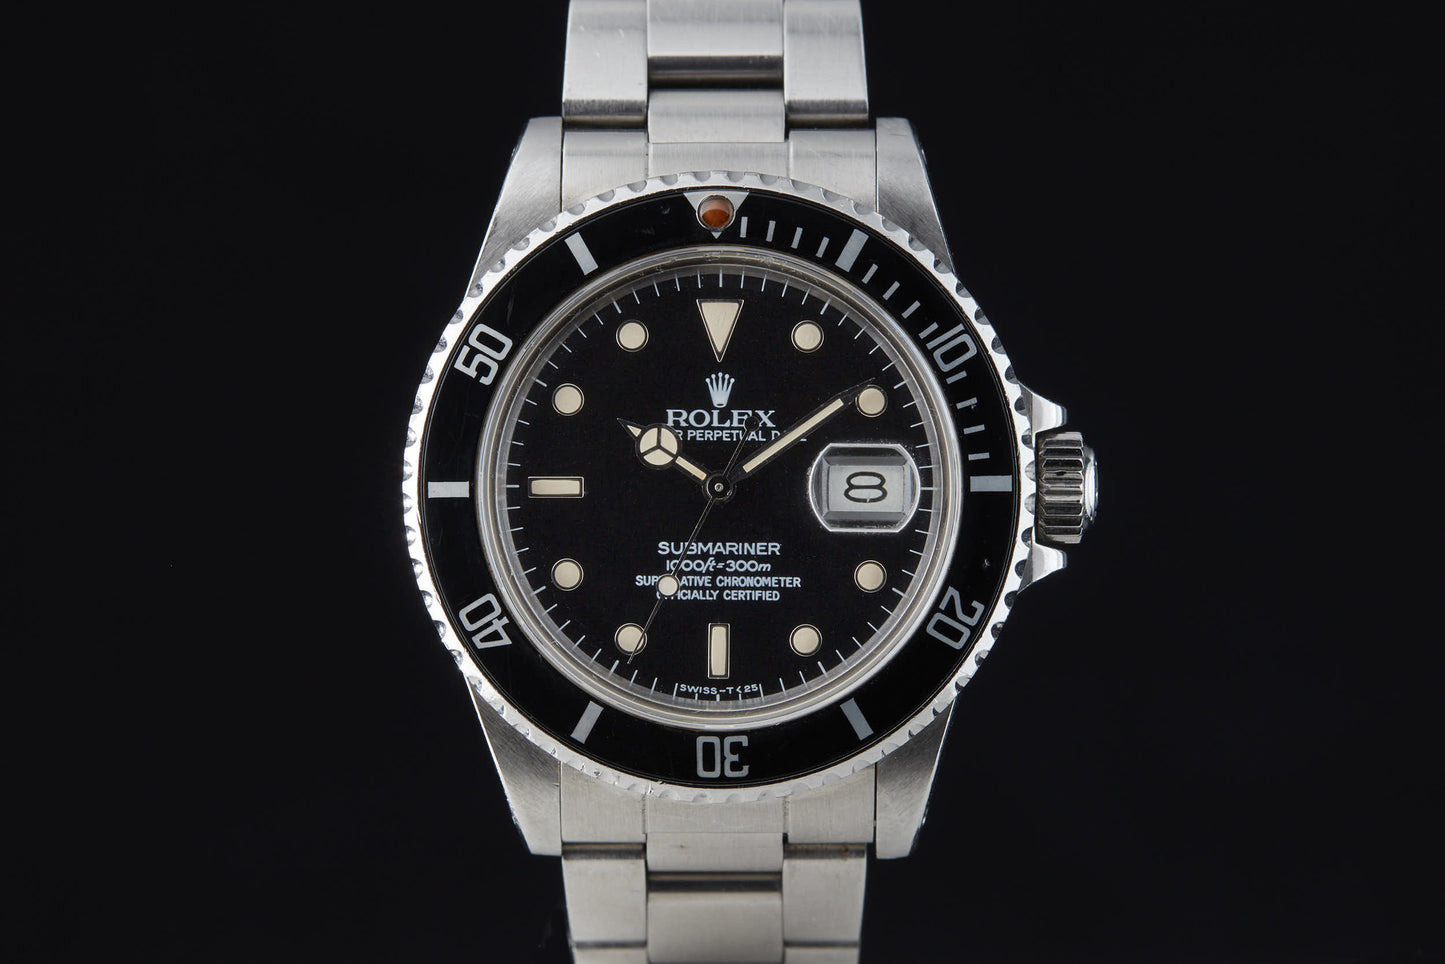 Rolex Submariner Reference 16800